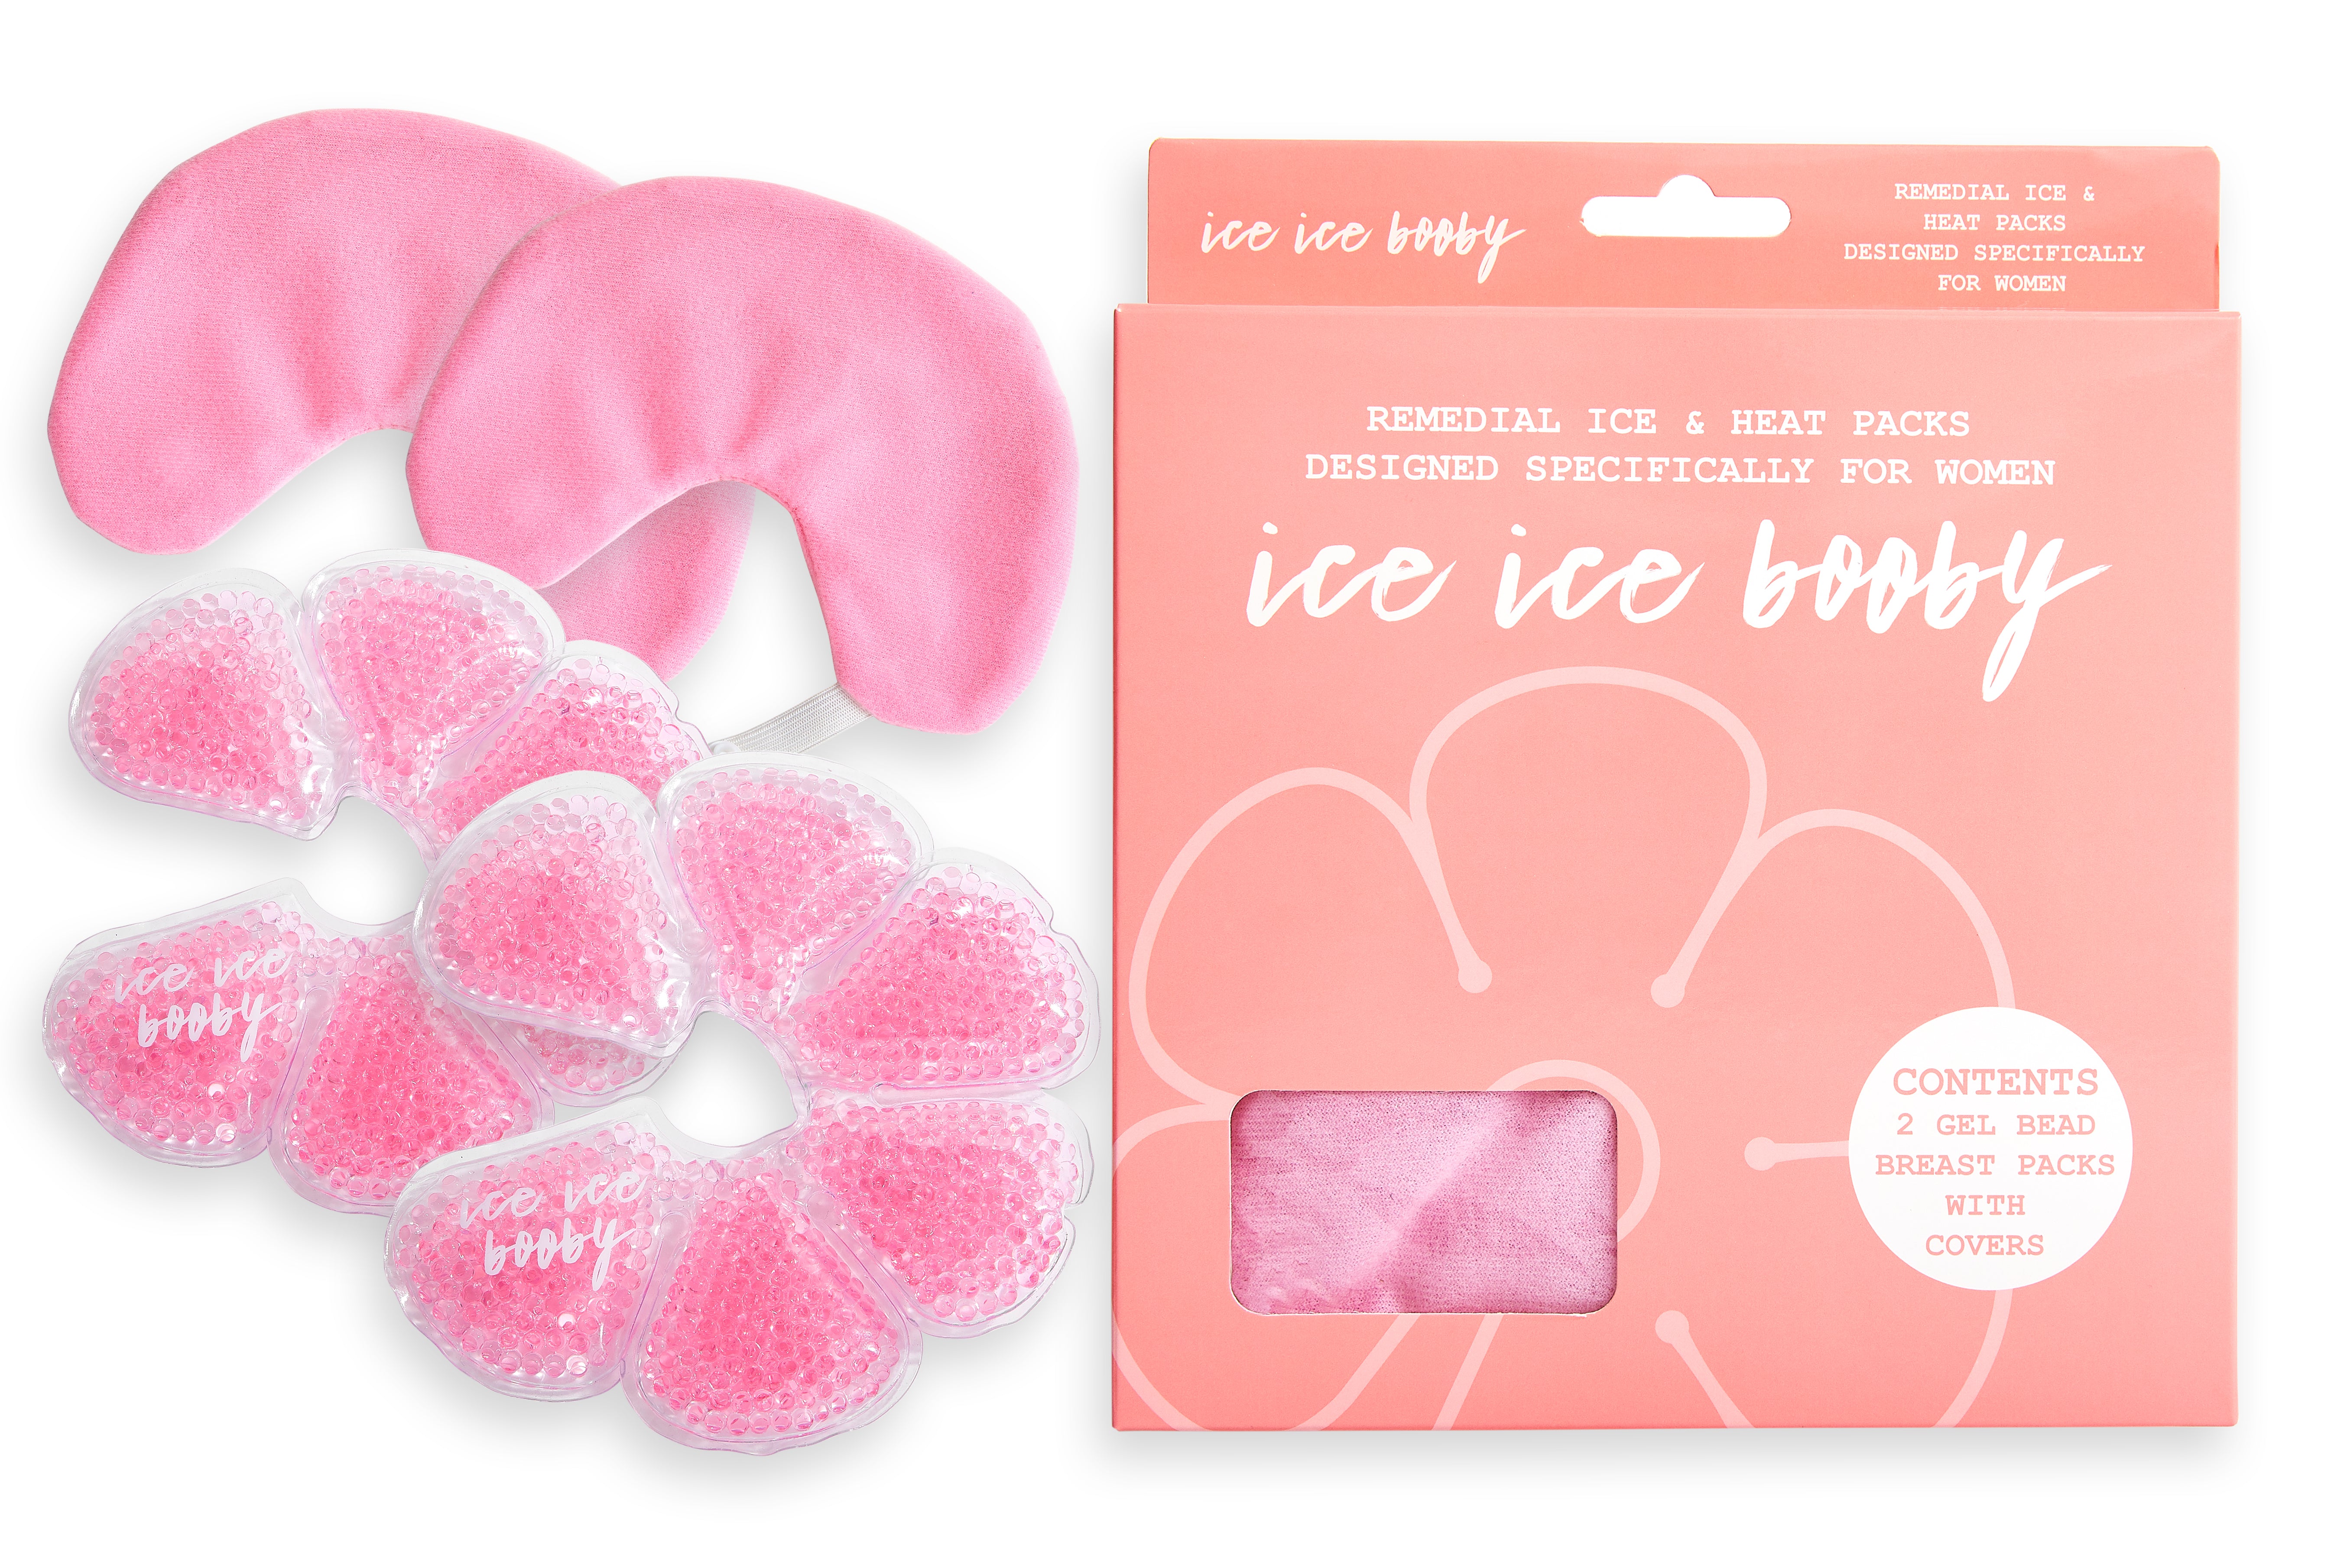 breast_and_perineal_ice_and_heat_packs by ice_ice_booby